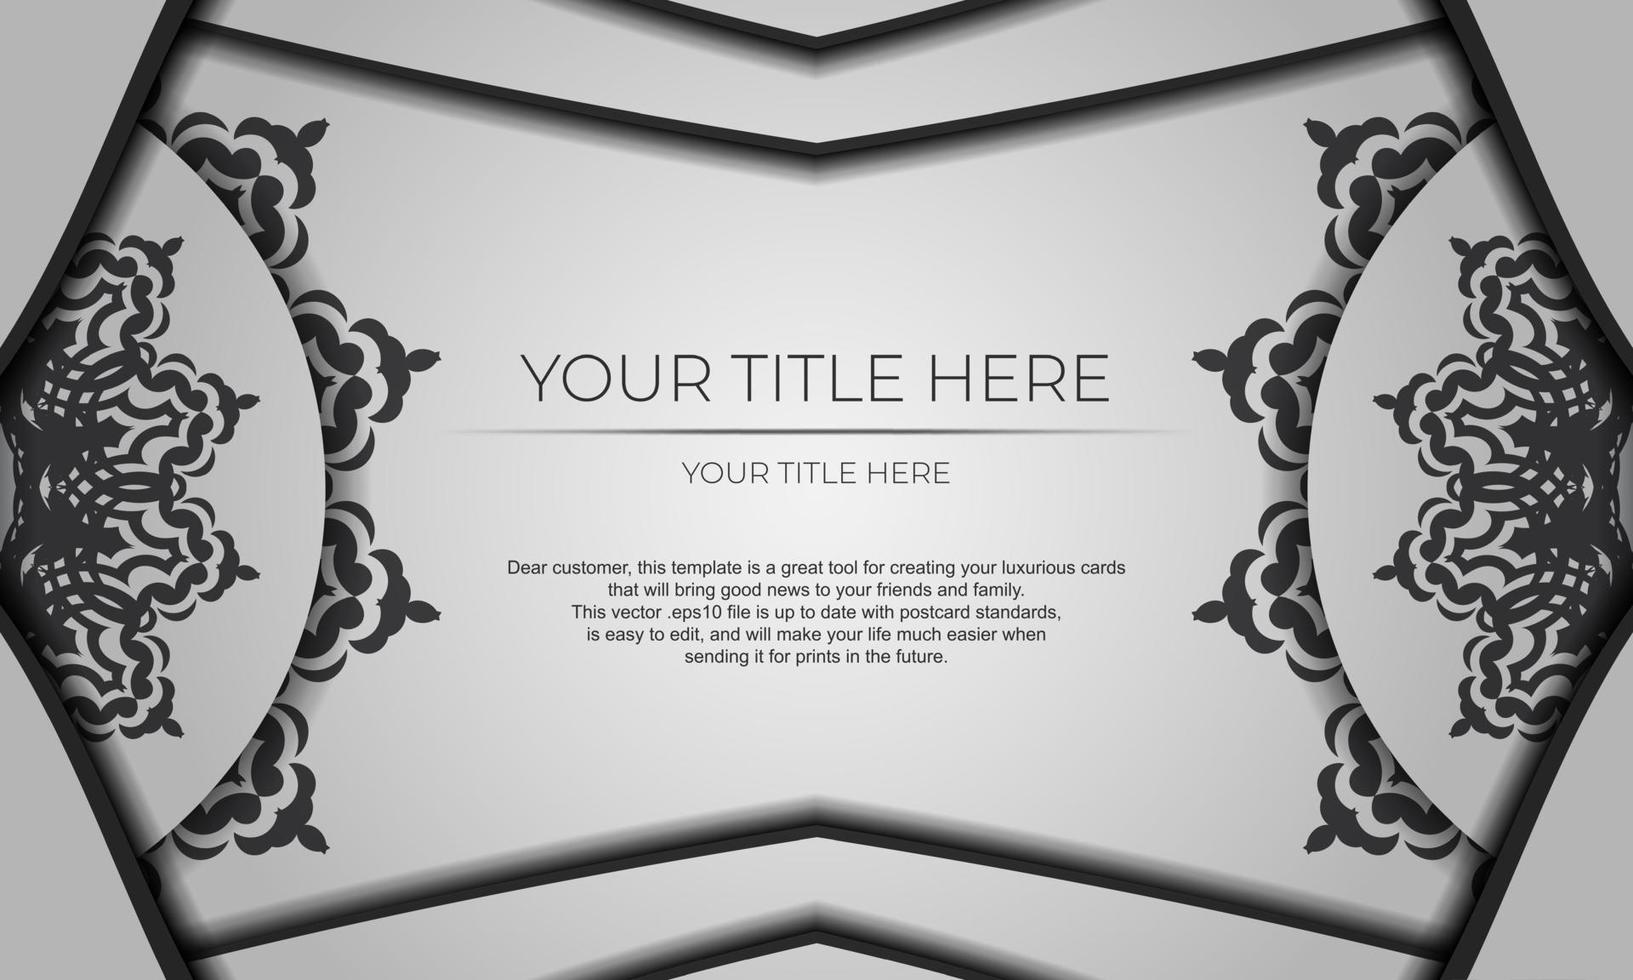 White vector banner with black ornaments and place for your text. Template for design printable invitation card with mandala patterns.